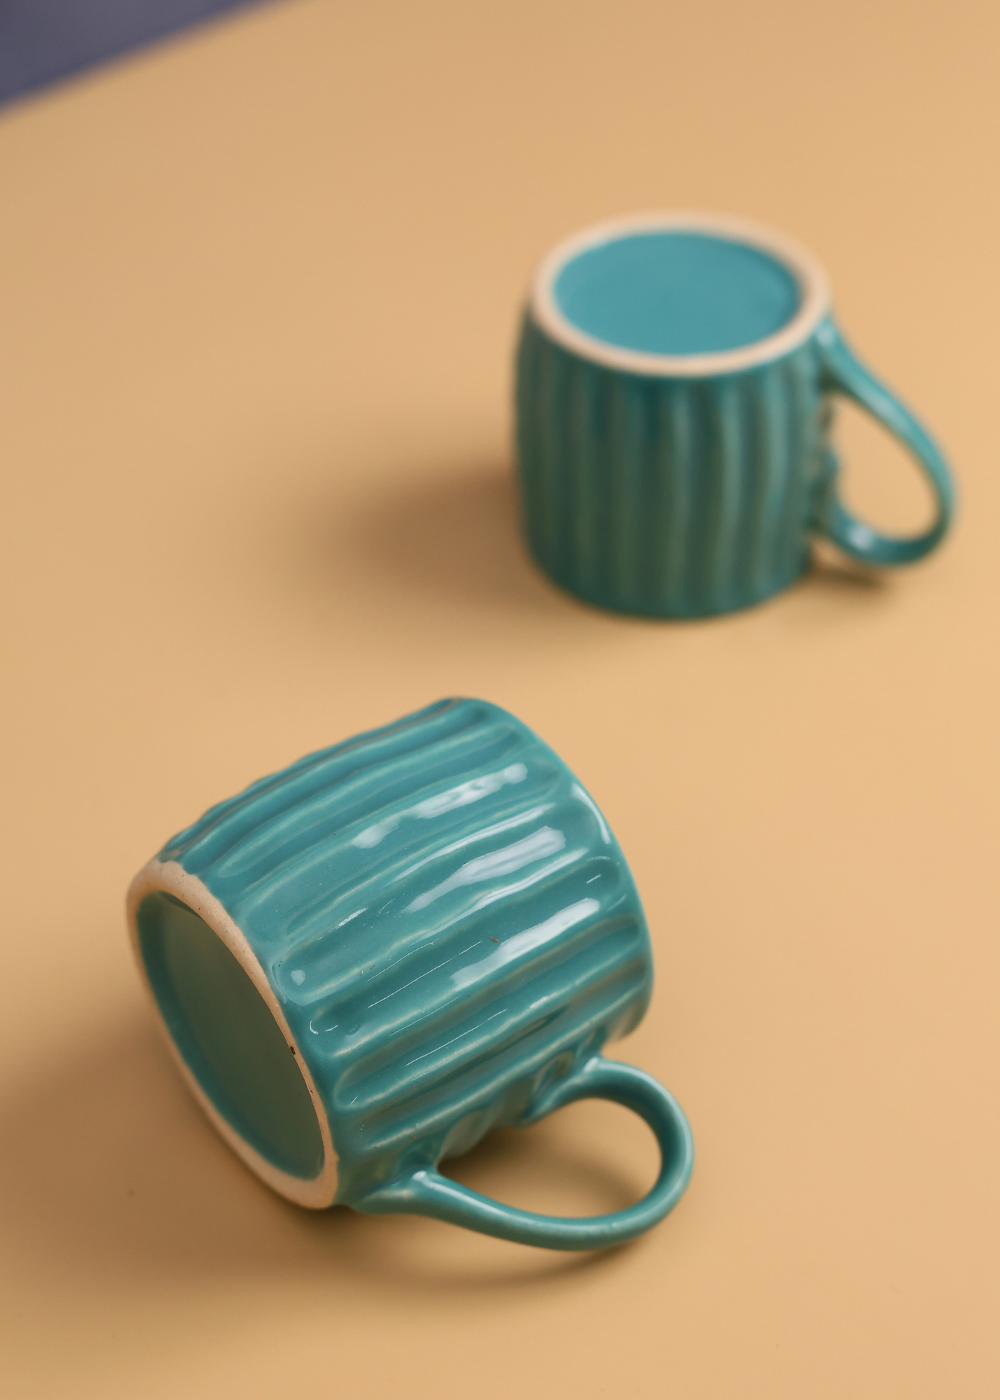 Teal Chai Cup